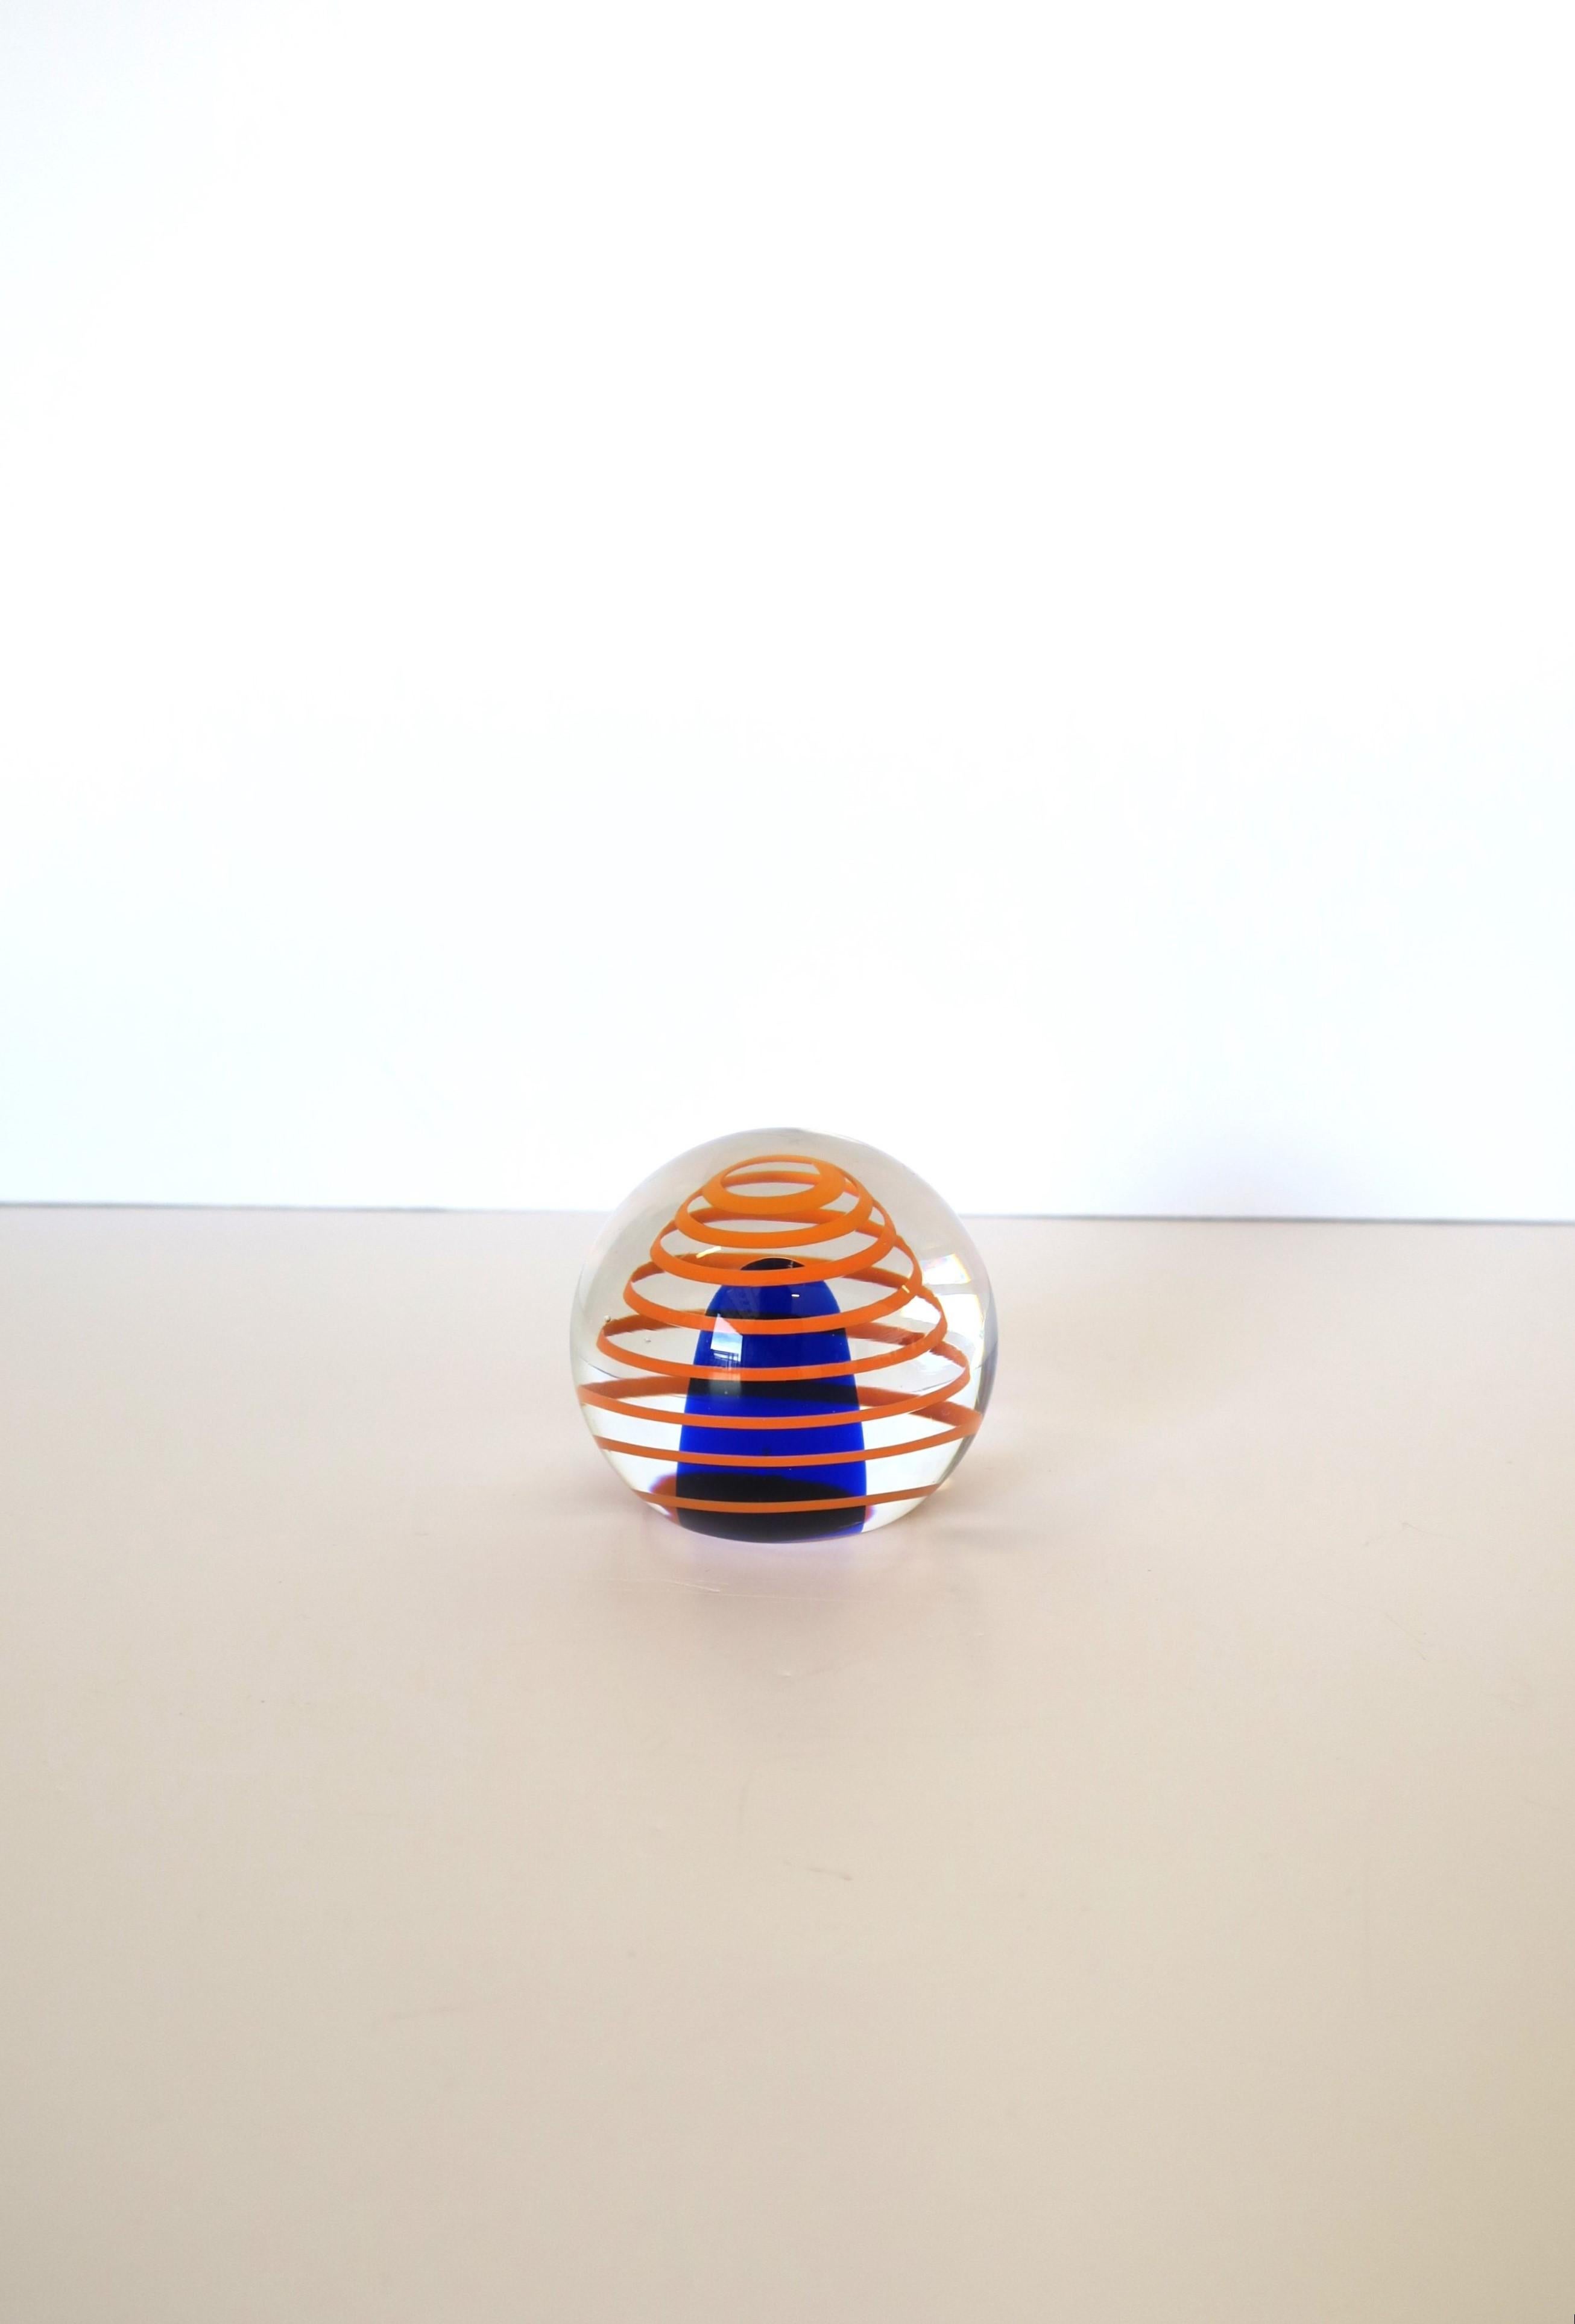 Mid-Century Modern Orange and Blue Art Glass Sphere Paperweight Decorative Object Signed For Sale